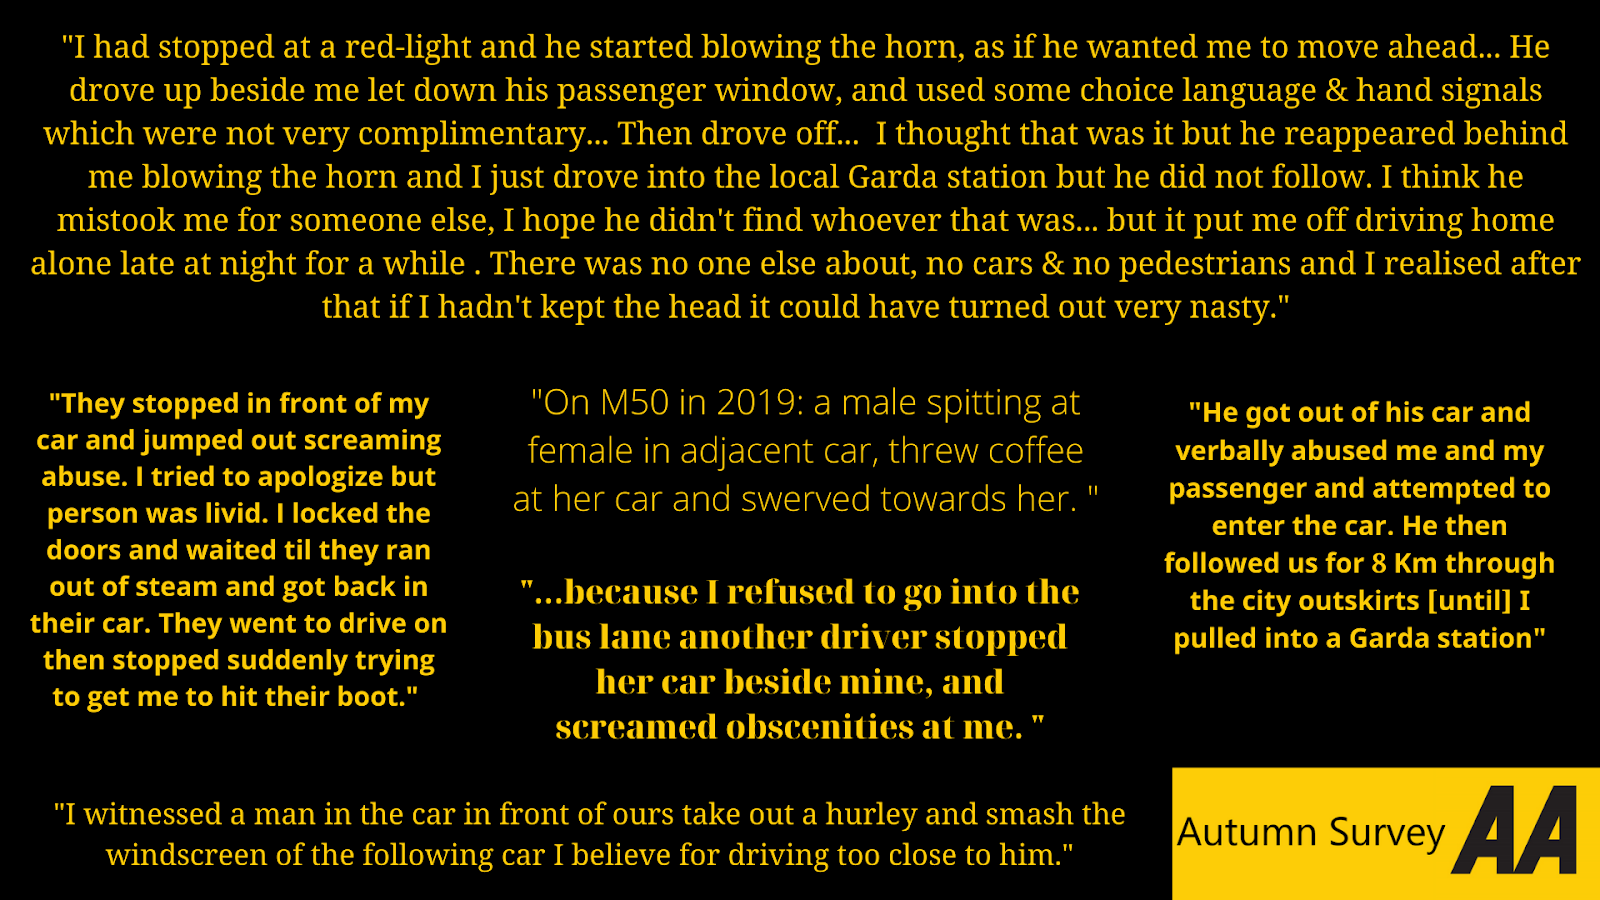 Graphic showing several comments about road rage from our survey respondents, including experiences of being followed, having someone get out of the car to yell at them, a coffee cup being thrown at a car, and a hurley smashing a windscreen.